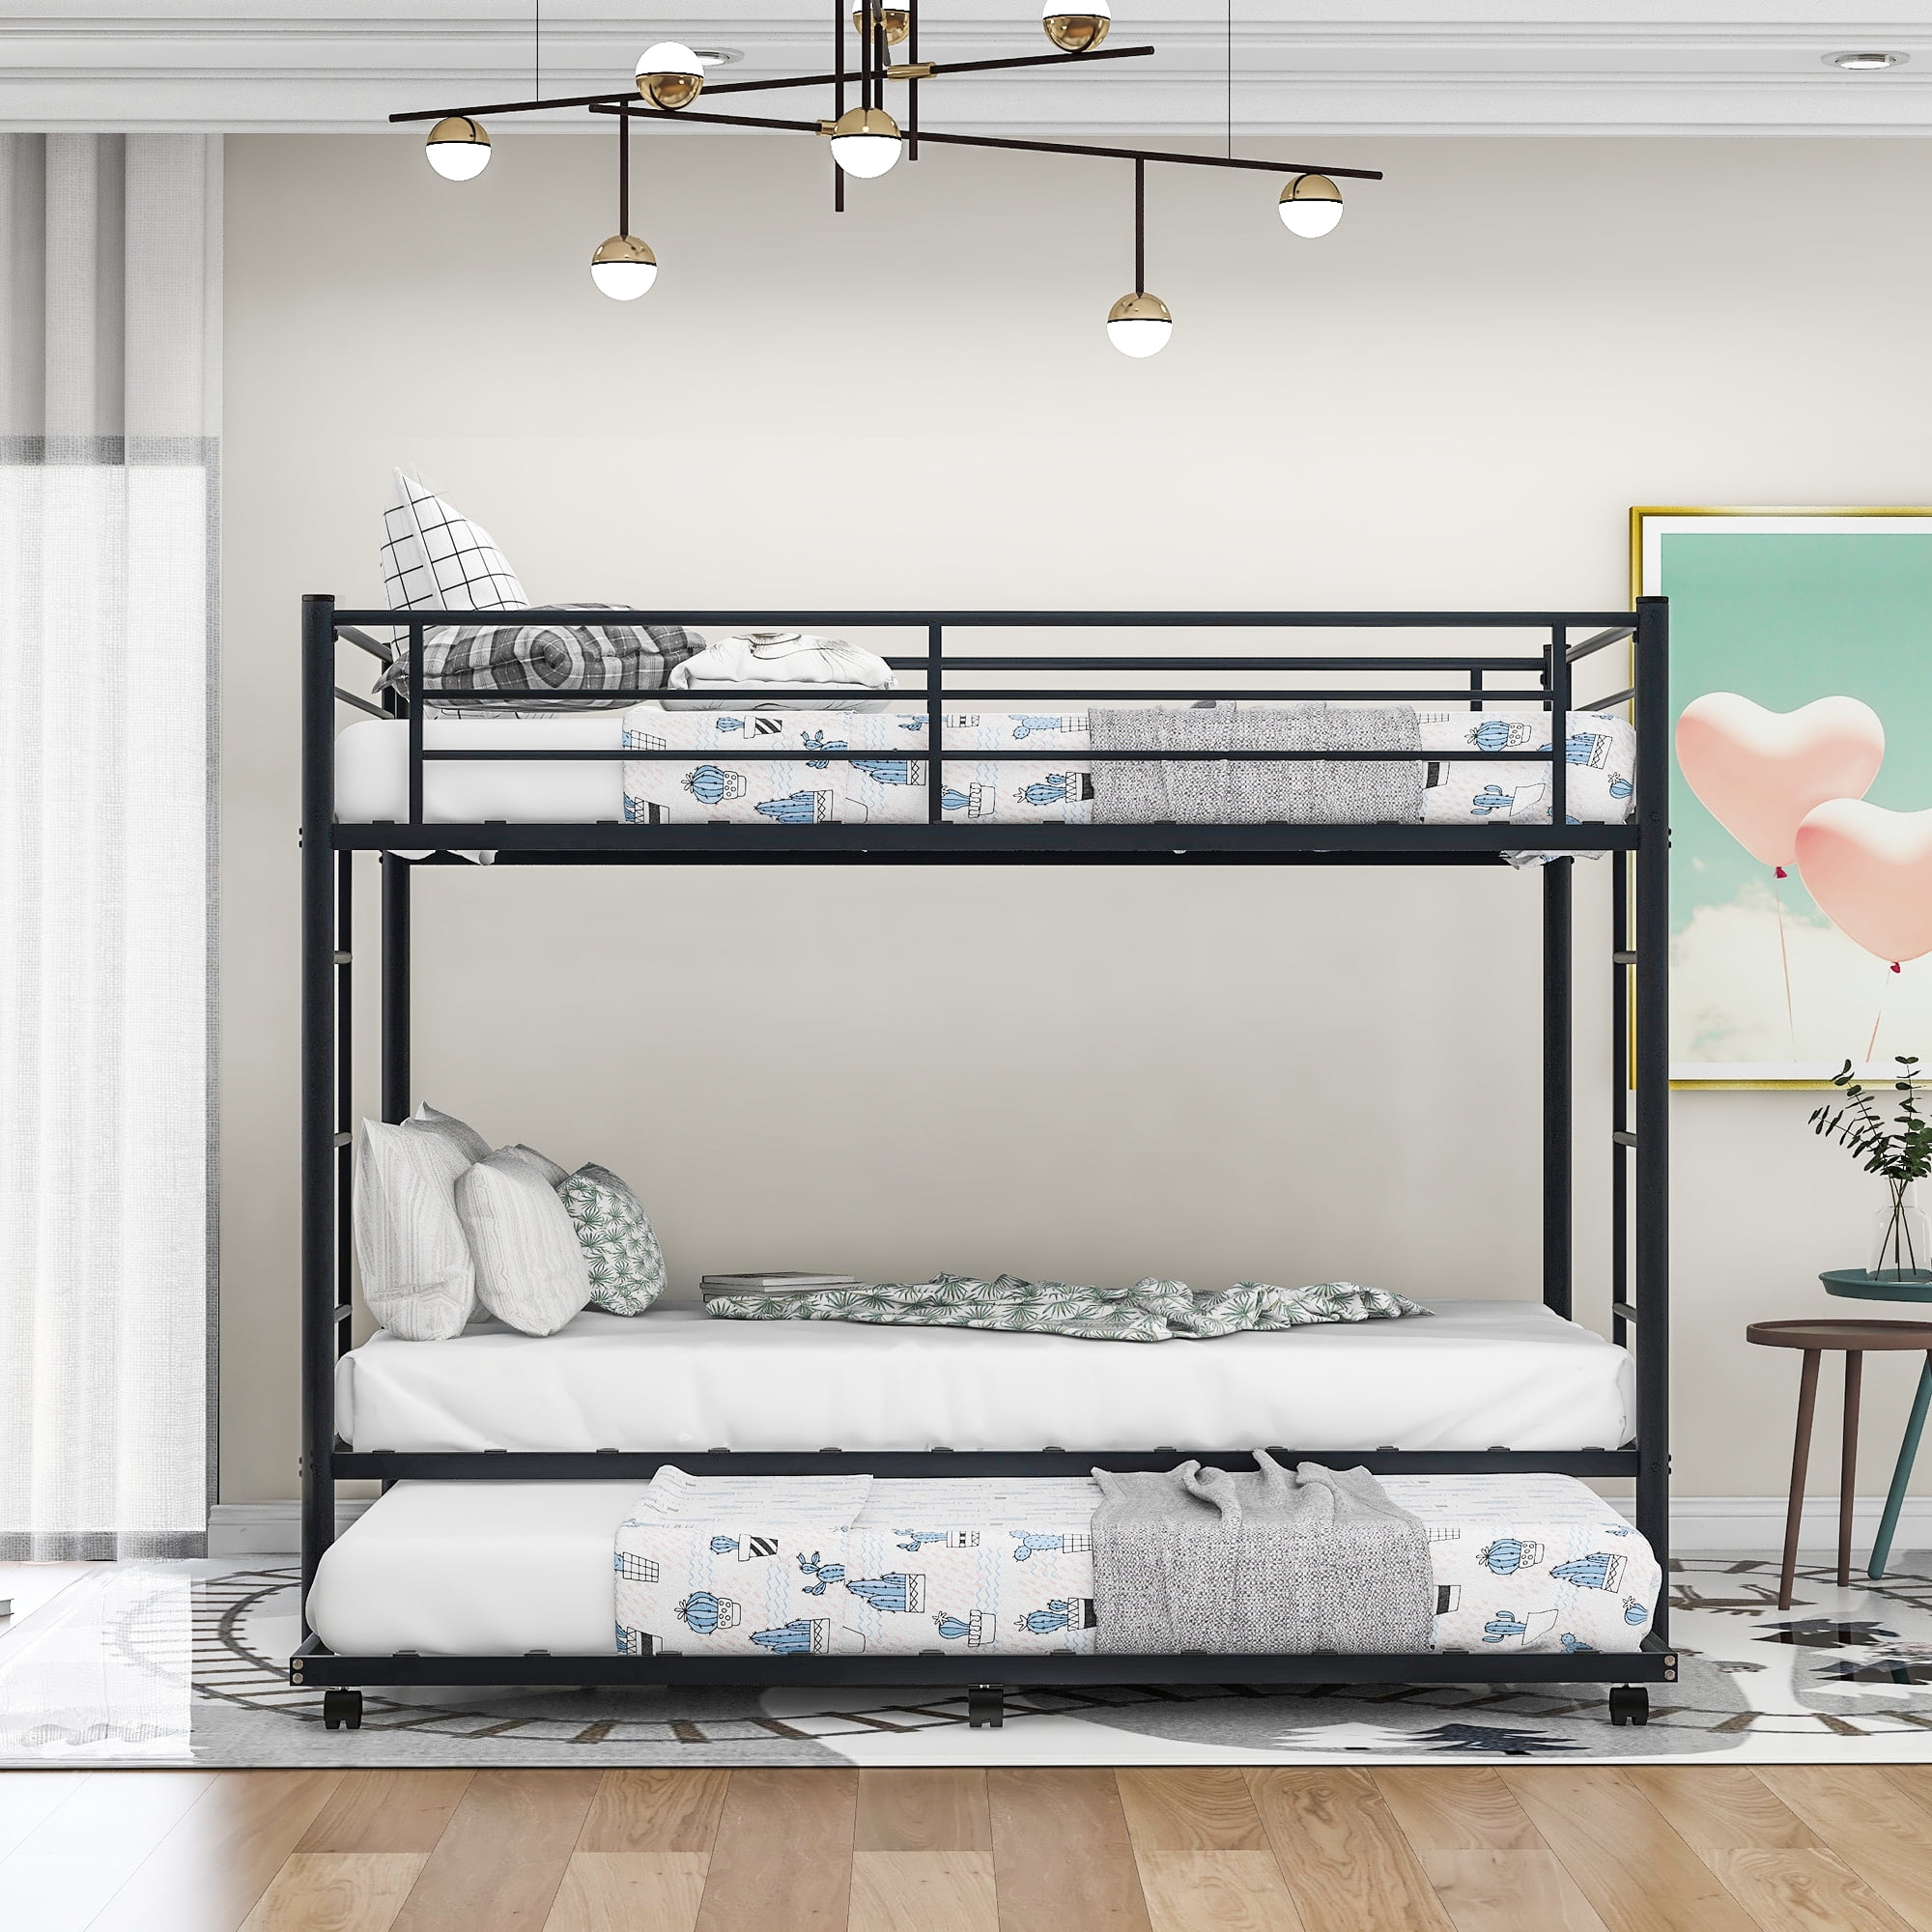 Euroco Metal Twin Over Bunk, Mainstays Twin Convertible Metal Bunk Bed Assembly Instructions